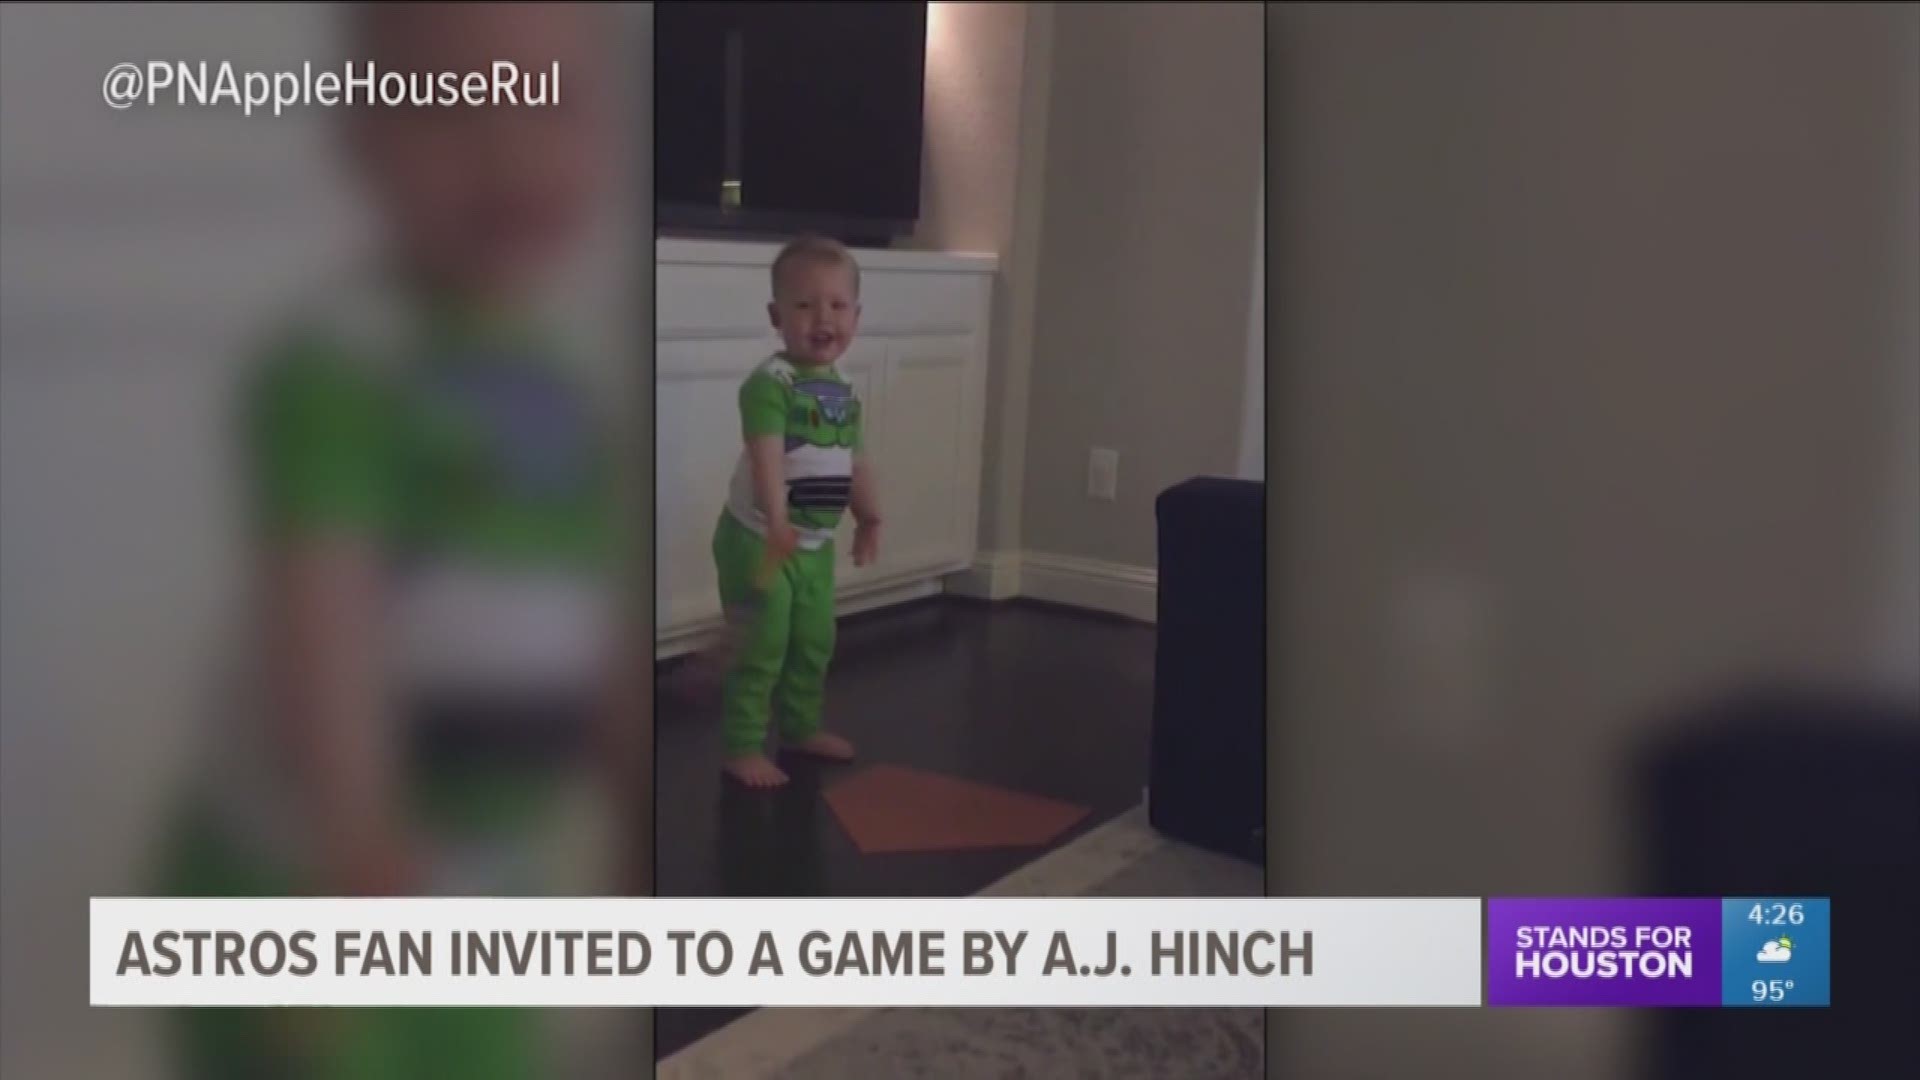 Little Astros fan Corey scored an awesome opportunity after video of him imitating the Astros players' batting stances went viral.